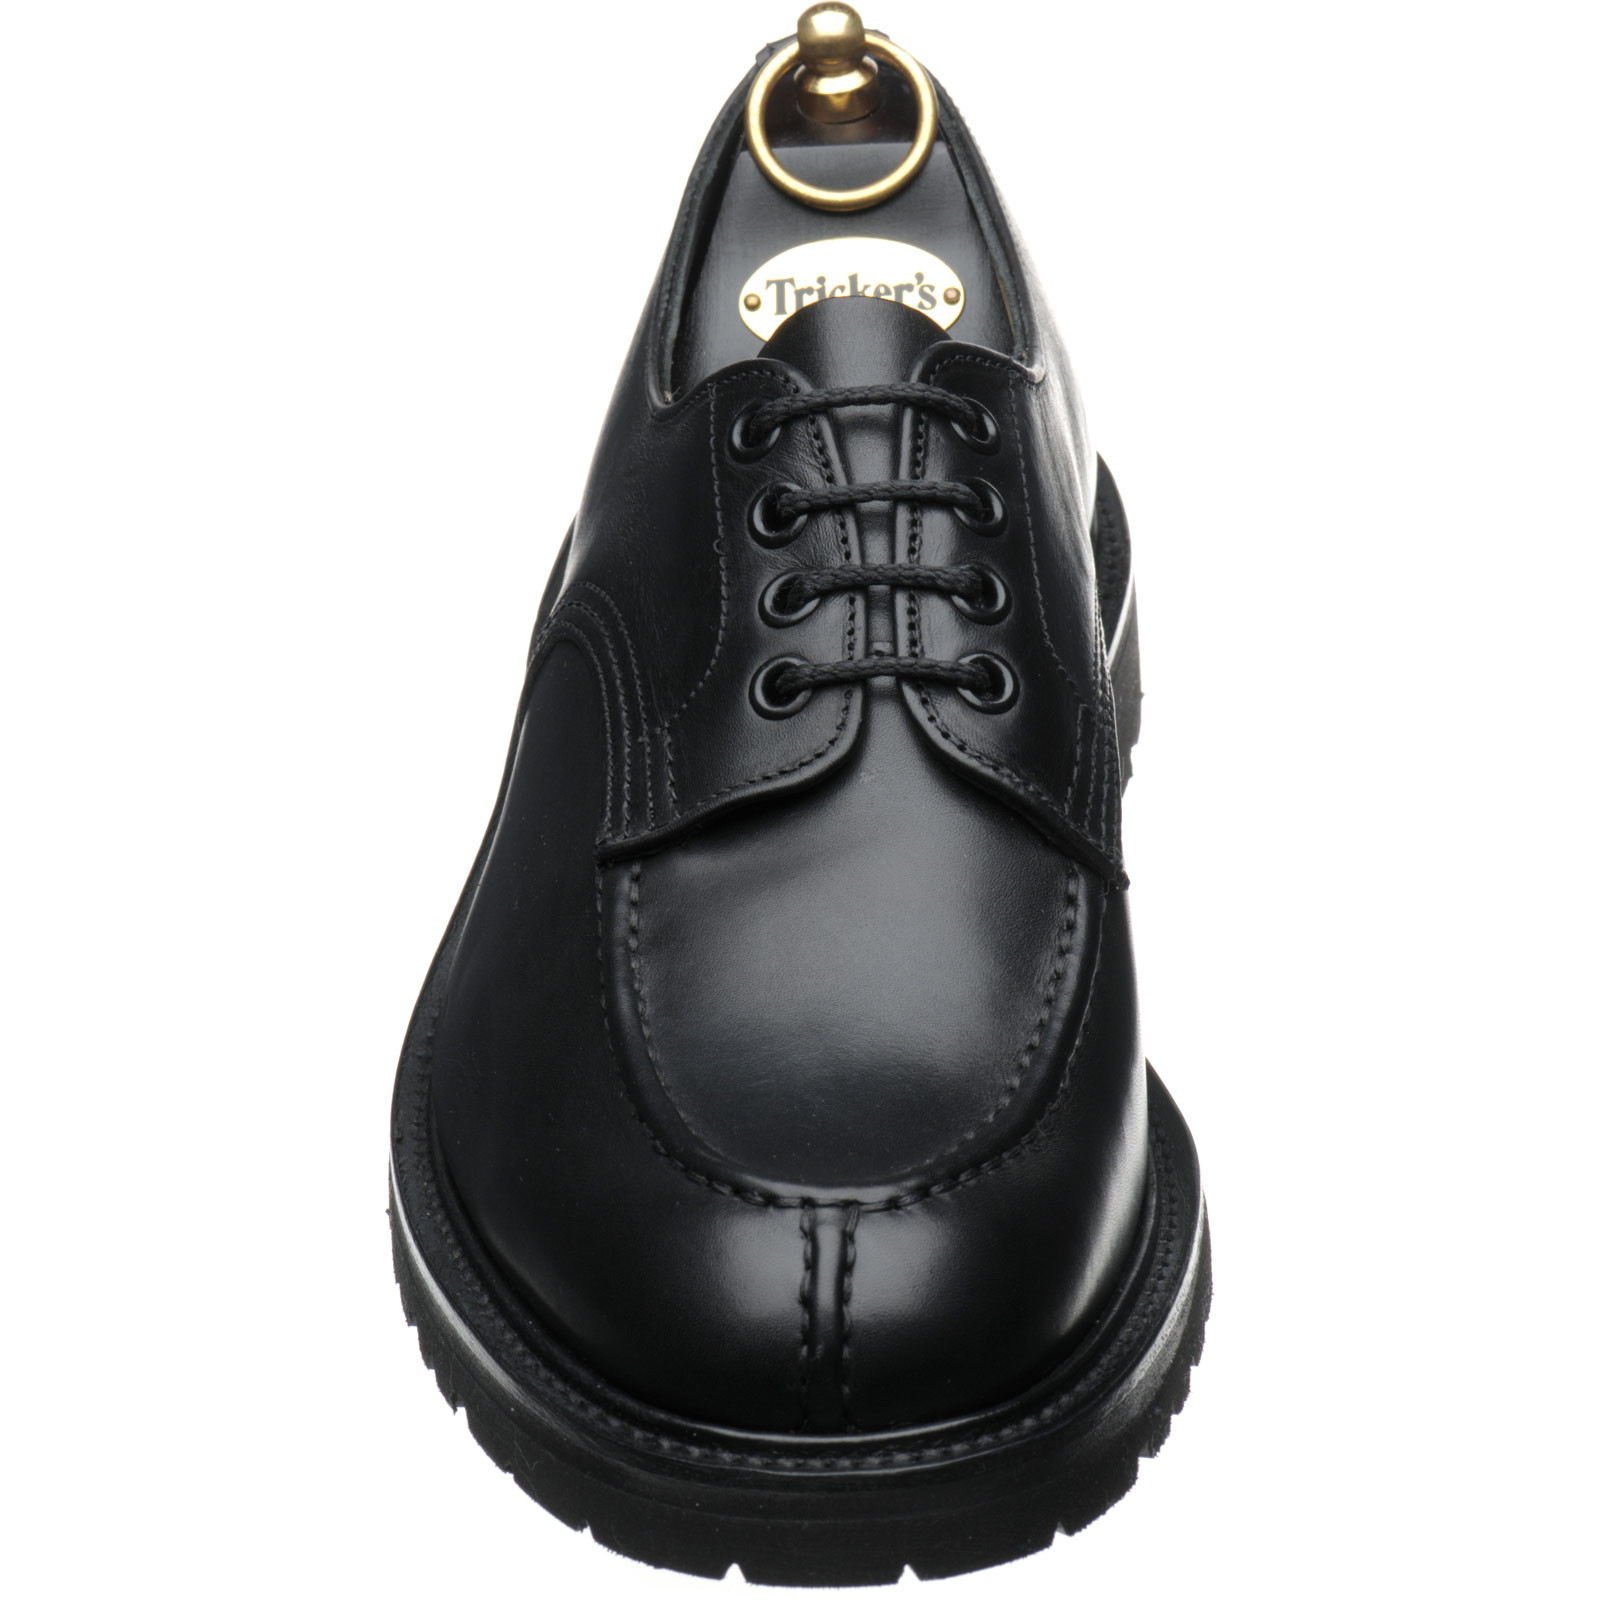 Trickers shoes | Trickers Sale | Kilsby rubber-soled Derby shoes in ...